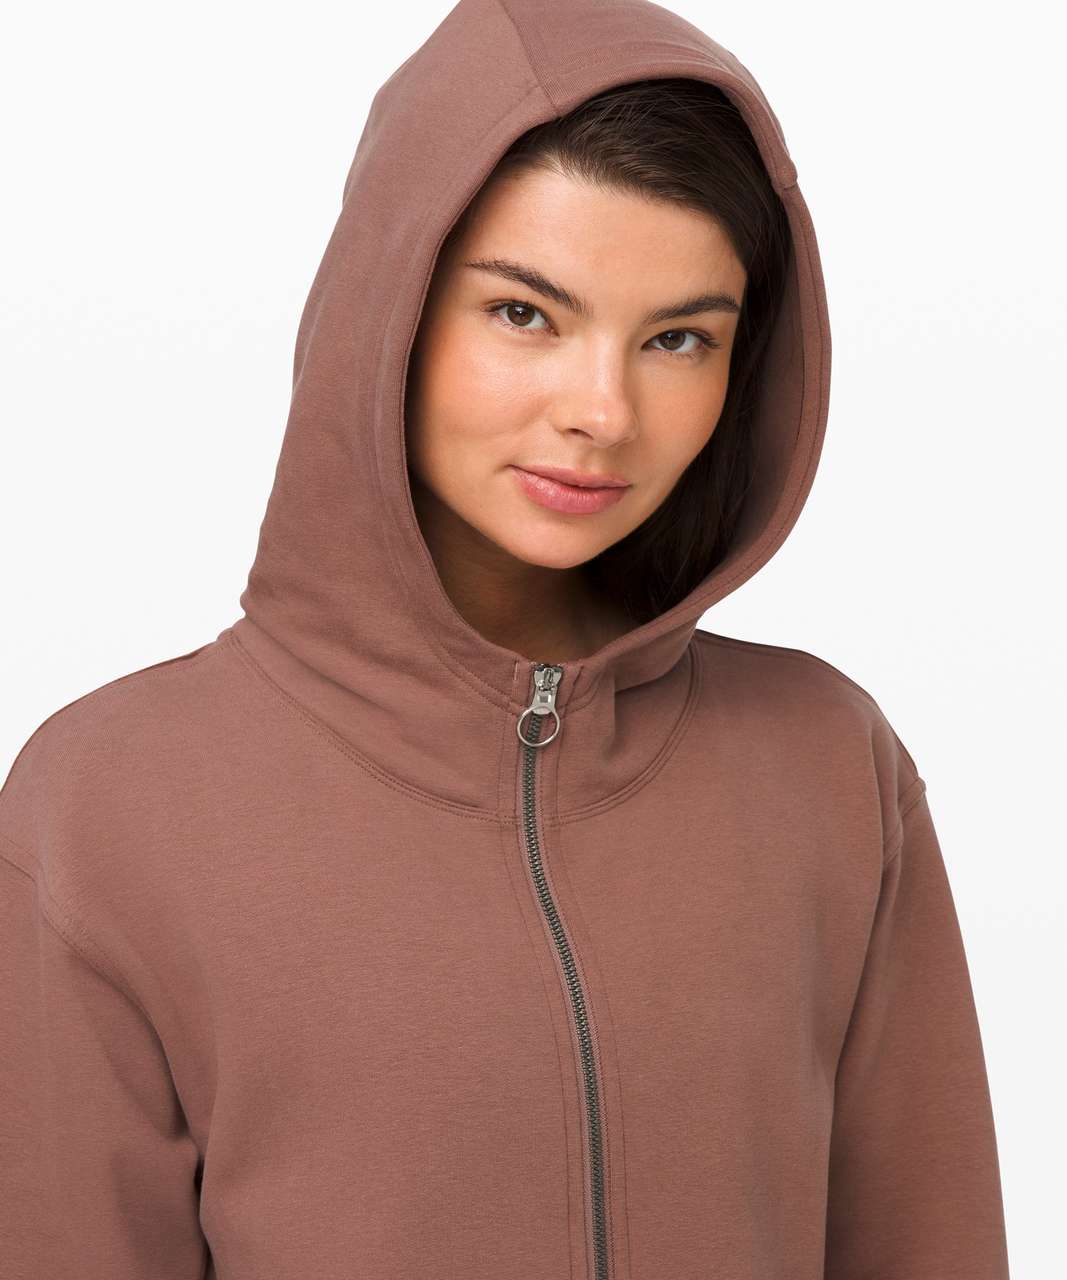 All Yours Hoodie- heathered ivory peach (XS) 5'4” size 6 in tops. I was on  the fence about this but I'm so glad I got it! Very soft&cozy and a nice  neutral